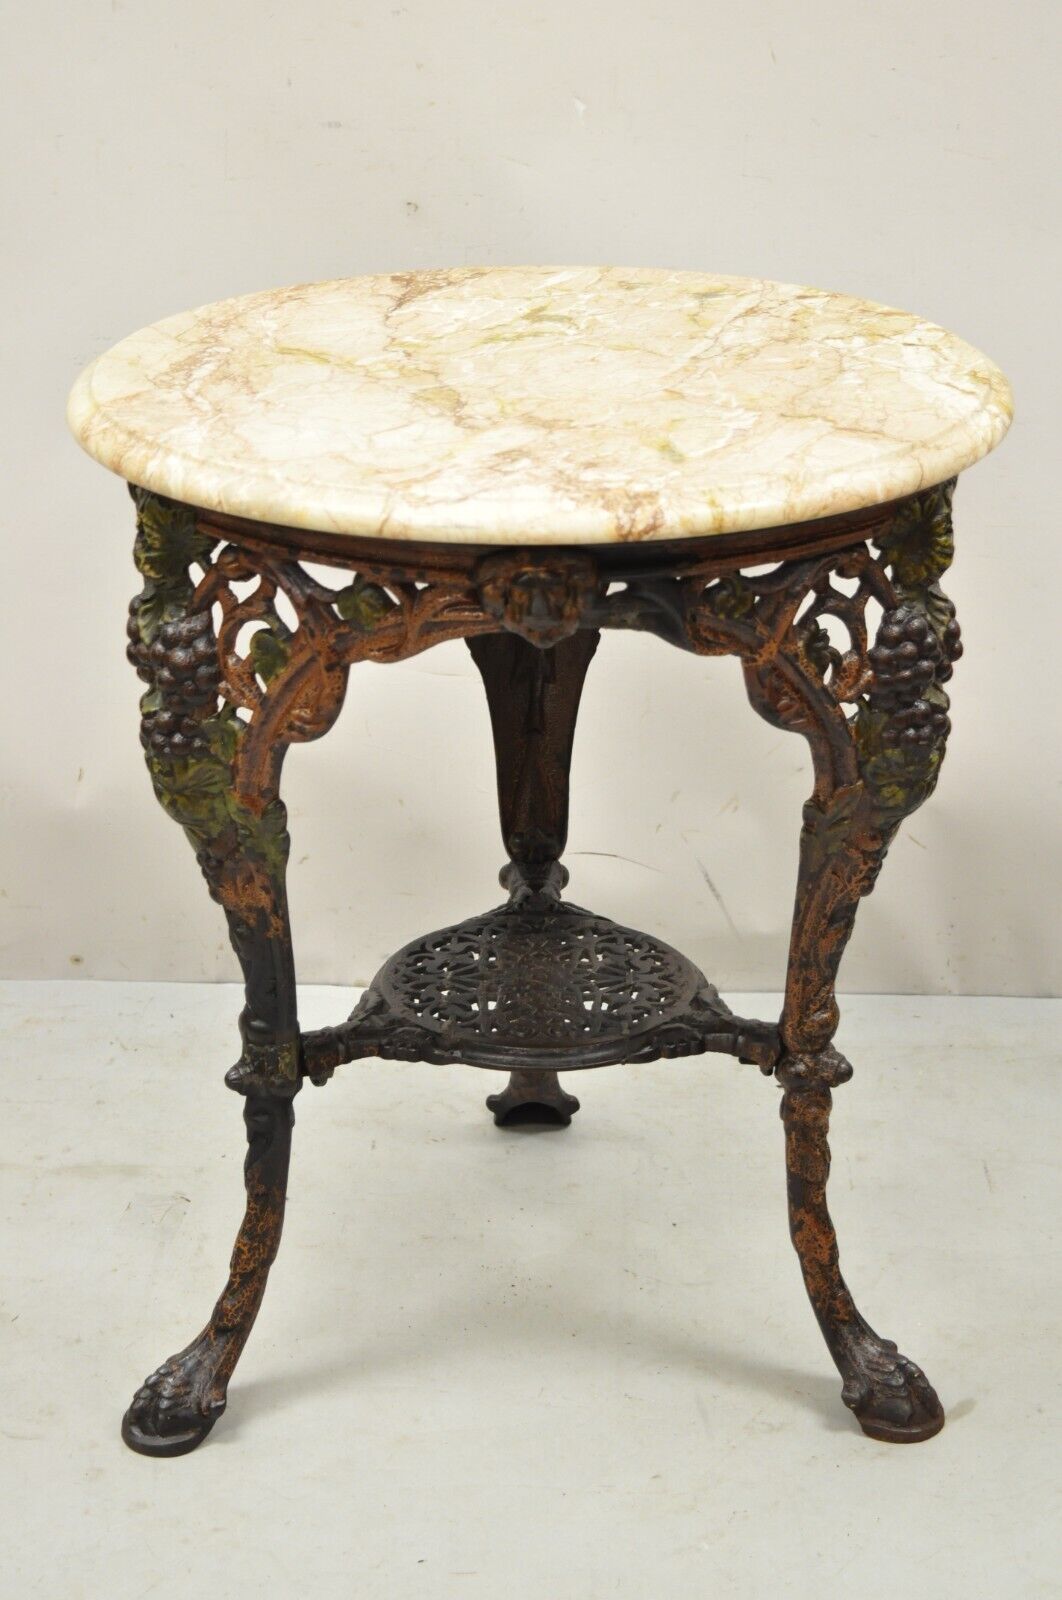 Antique English Victorian Cast Iron Round Marble Top Pub Table